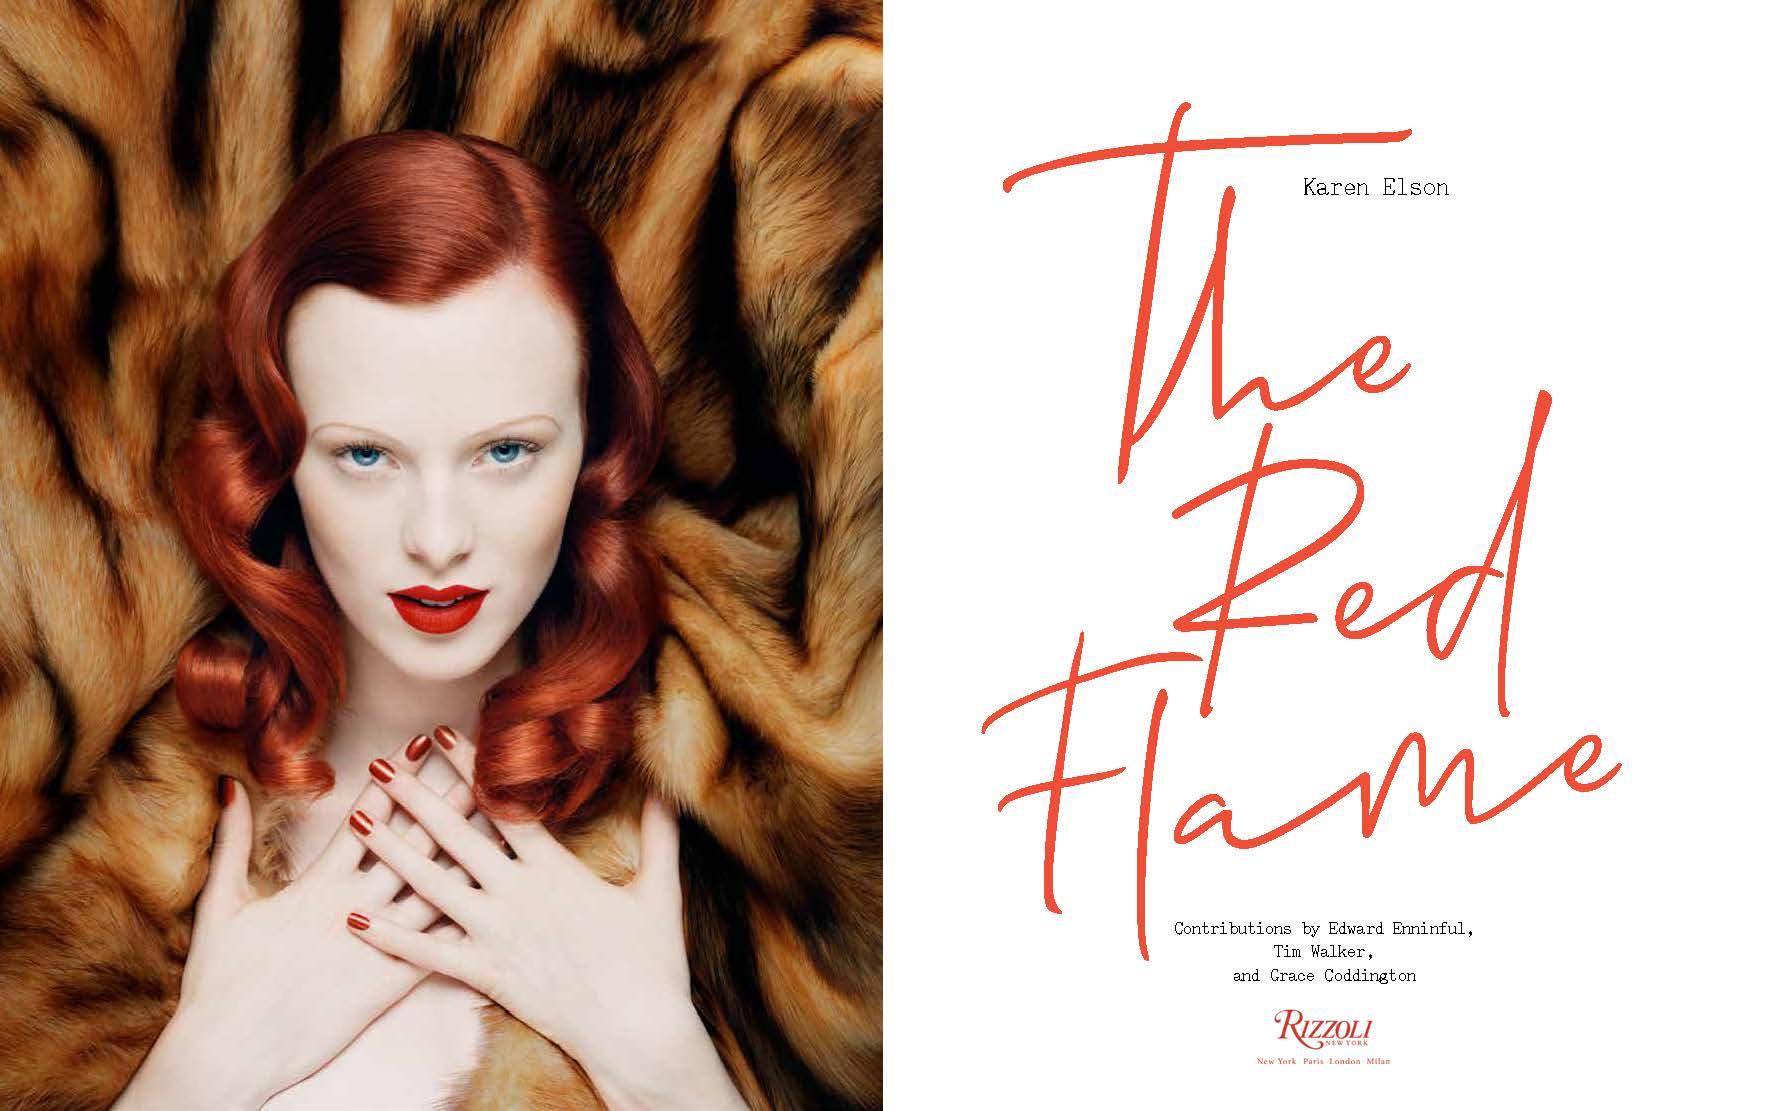 Author Karen Elson, Foreword by Edward Enninful and Tim Walker, Contributions by Grace Coddington
One of fashion's most iconic redheads pens a moving coming-of-age story chronicling her professional and personal metamorphosis.

At age eighteen,